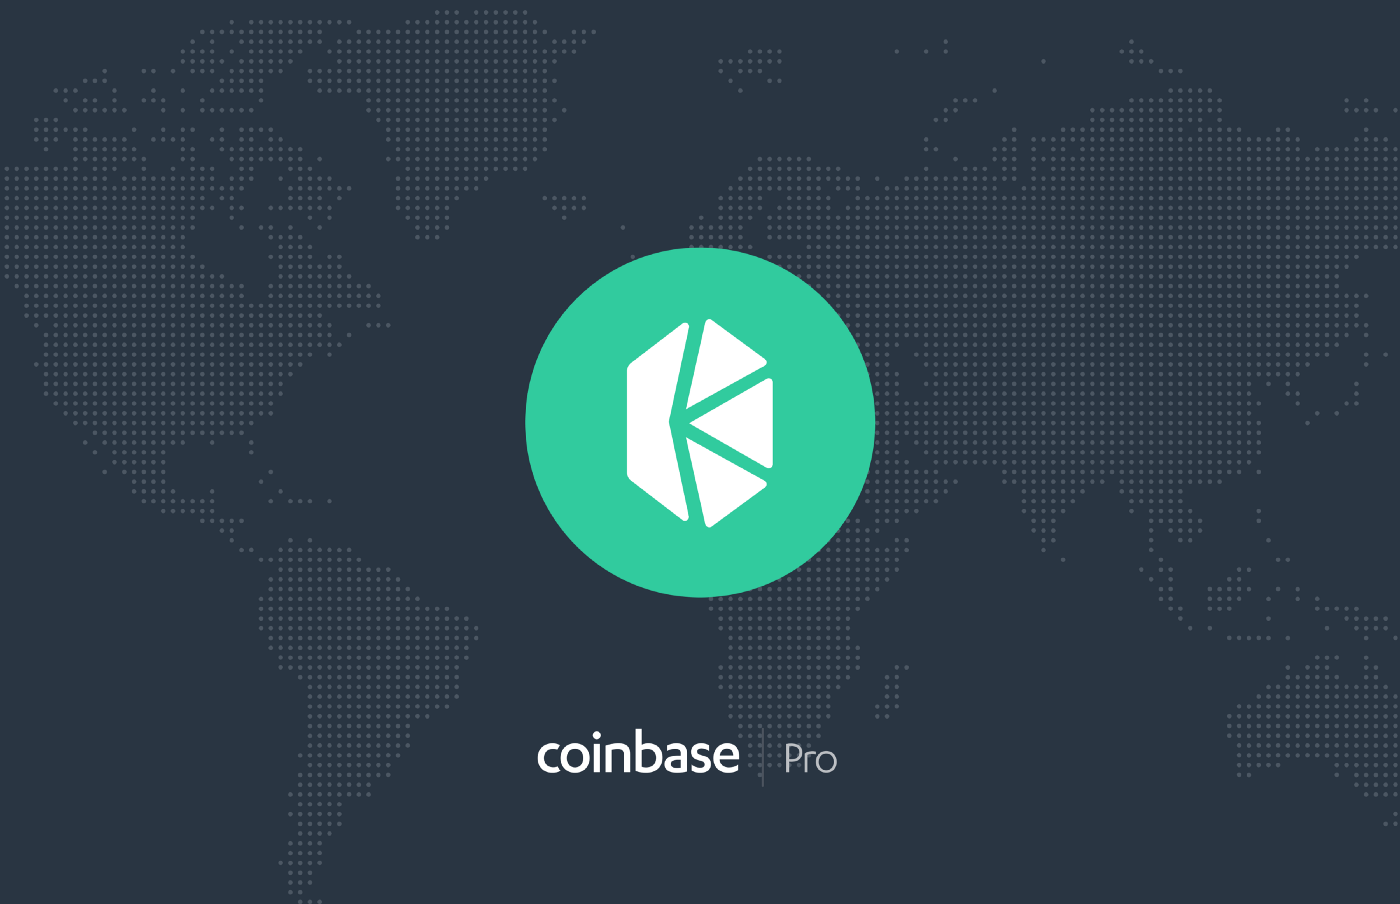 Kyber Network (KNC) is launching on Coinbase Pro